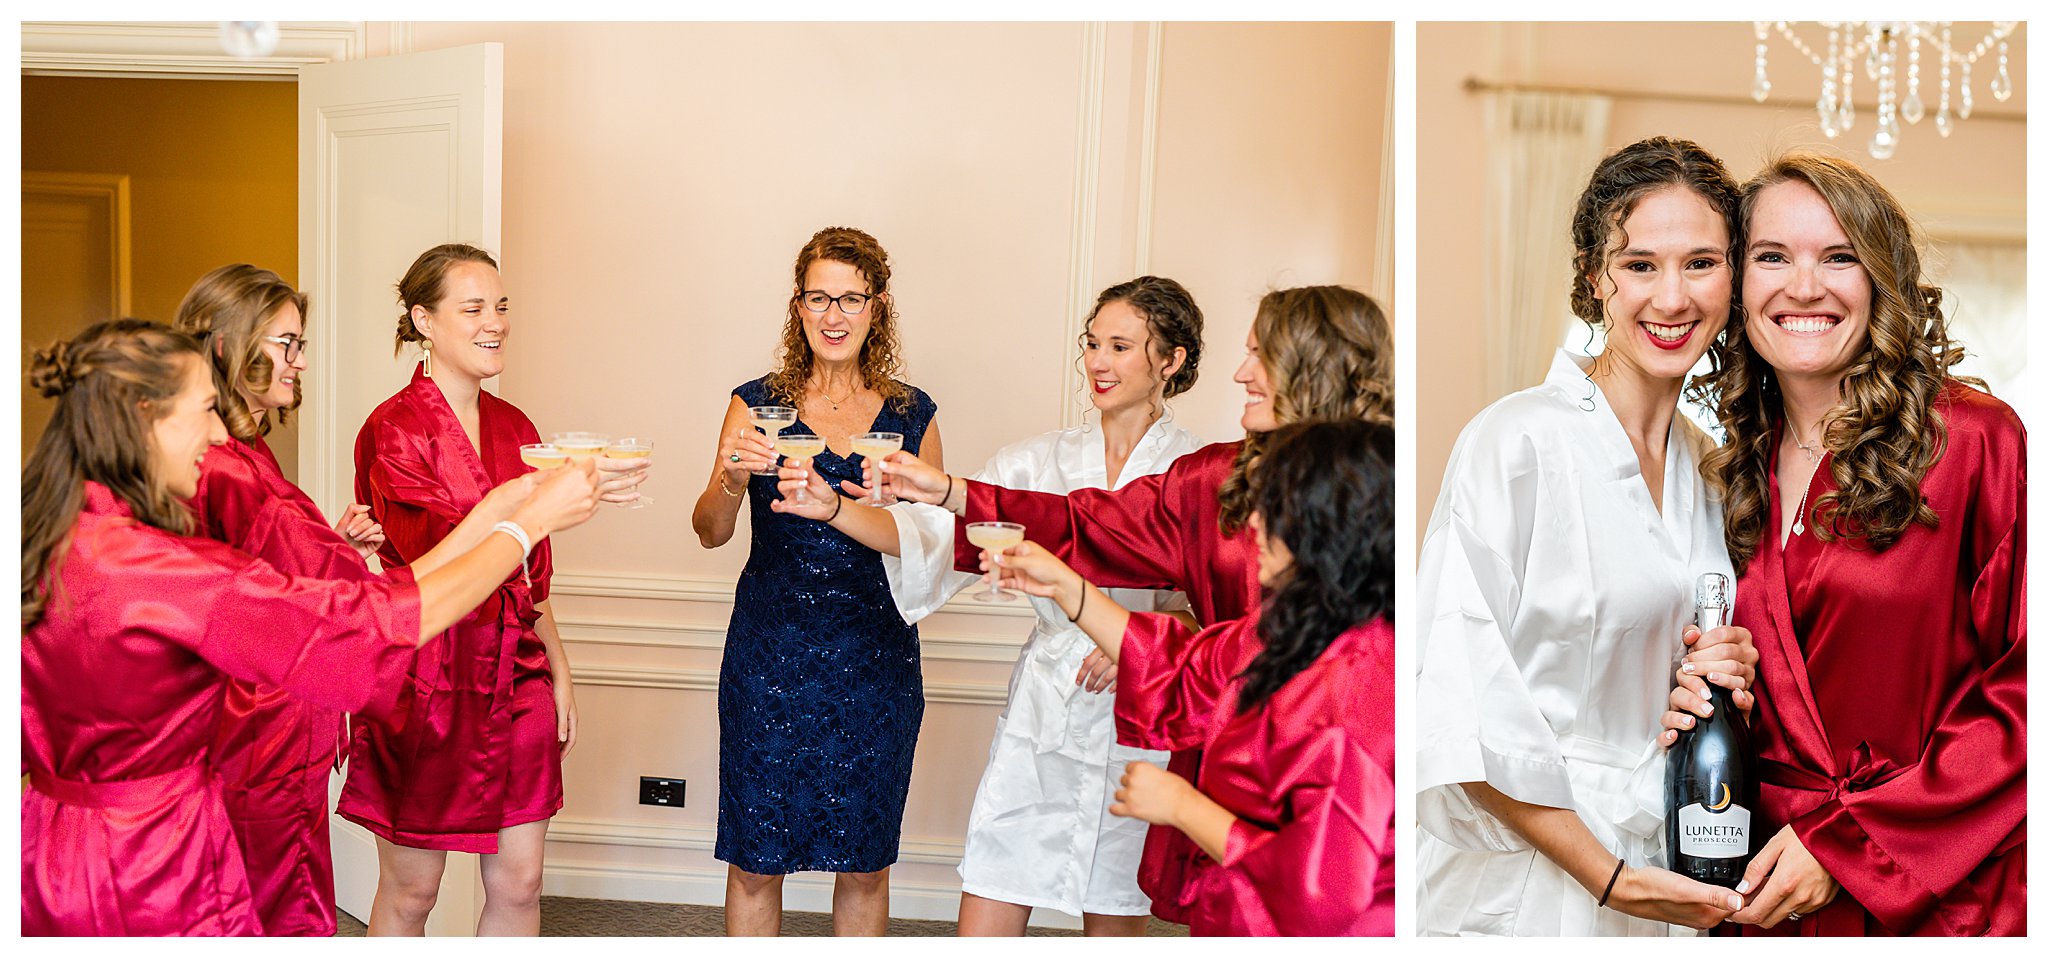 A bride toasts with her bridesmaids